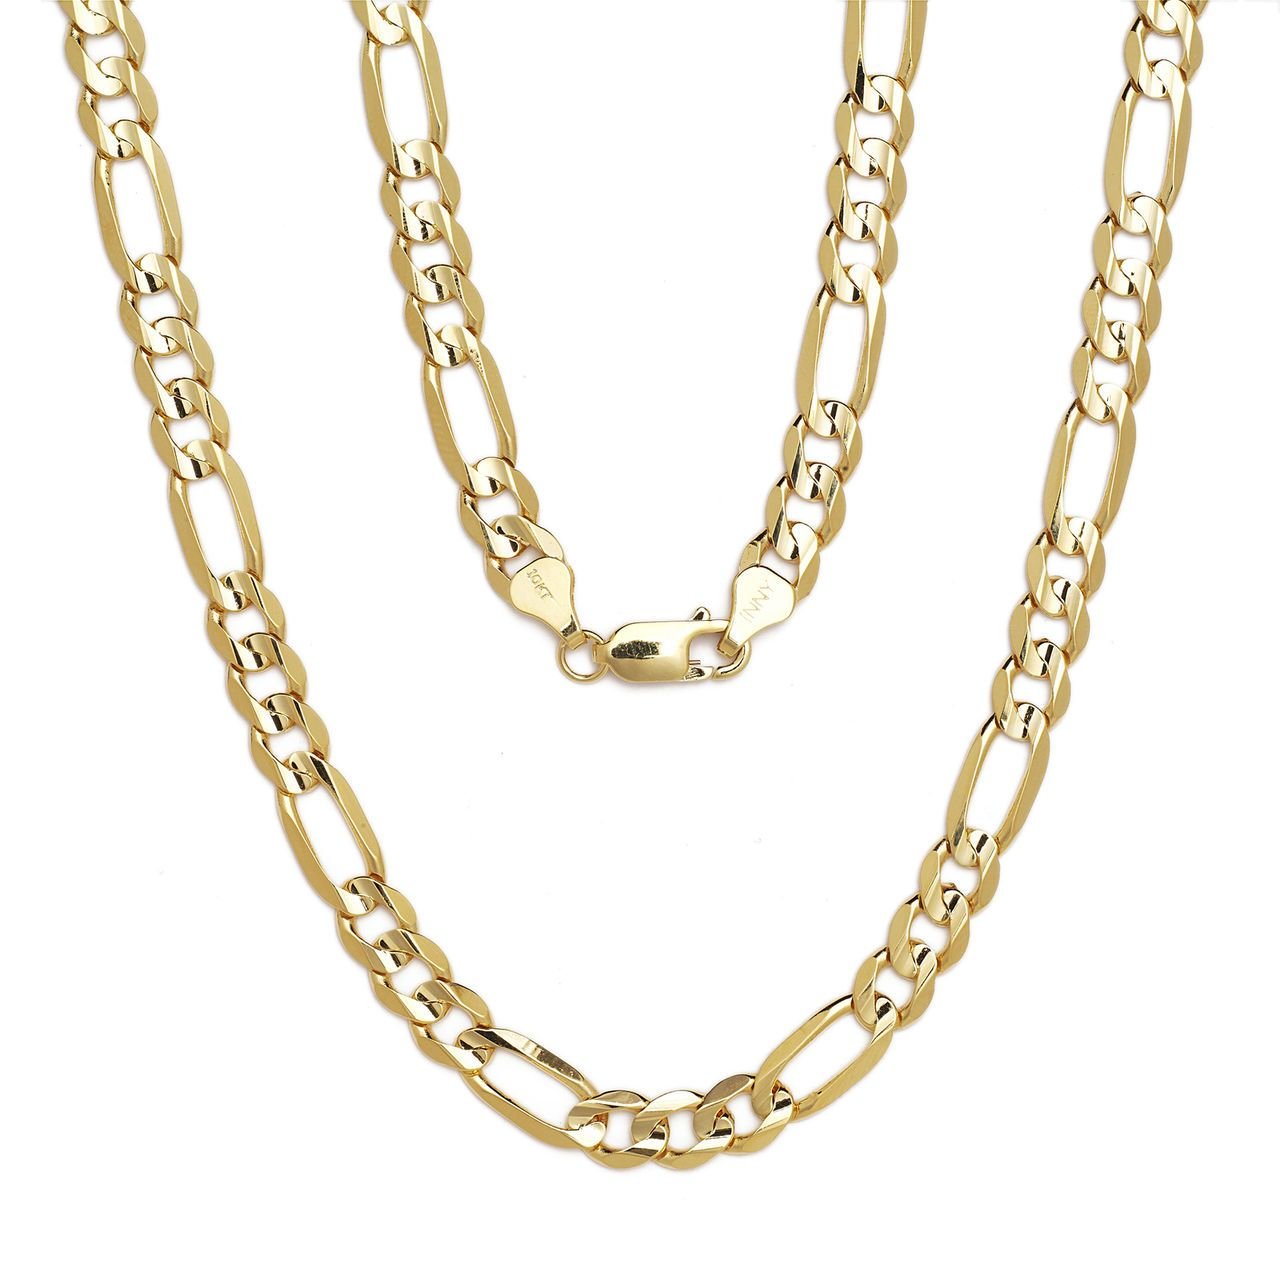 10k Yellow Gold Figaro Chain Necklace with Concave Look, 0.28 Inch (7mm)